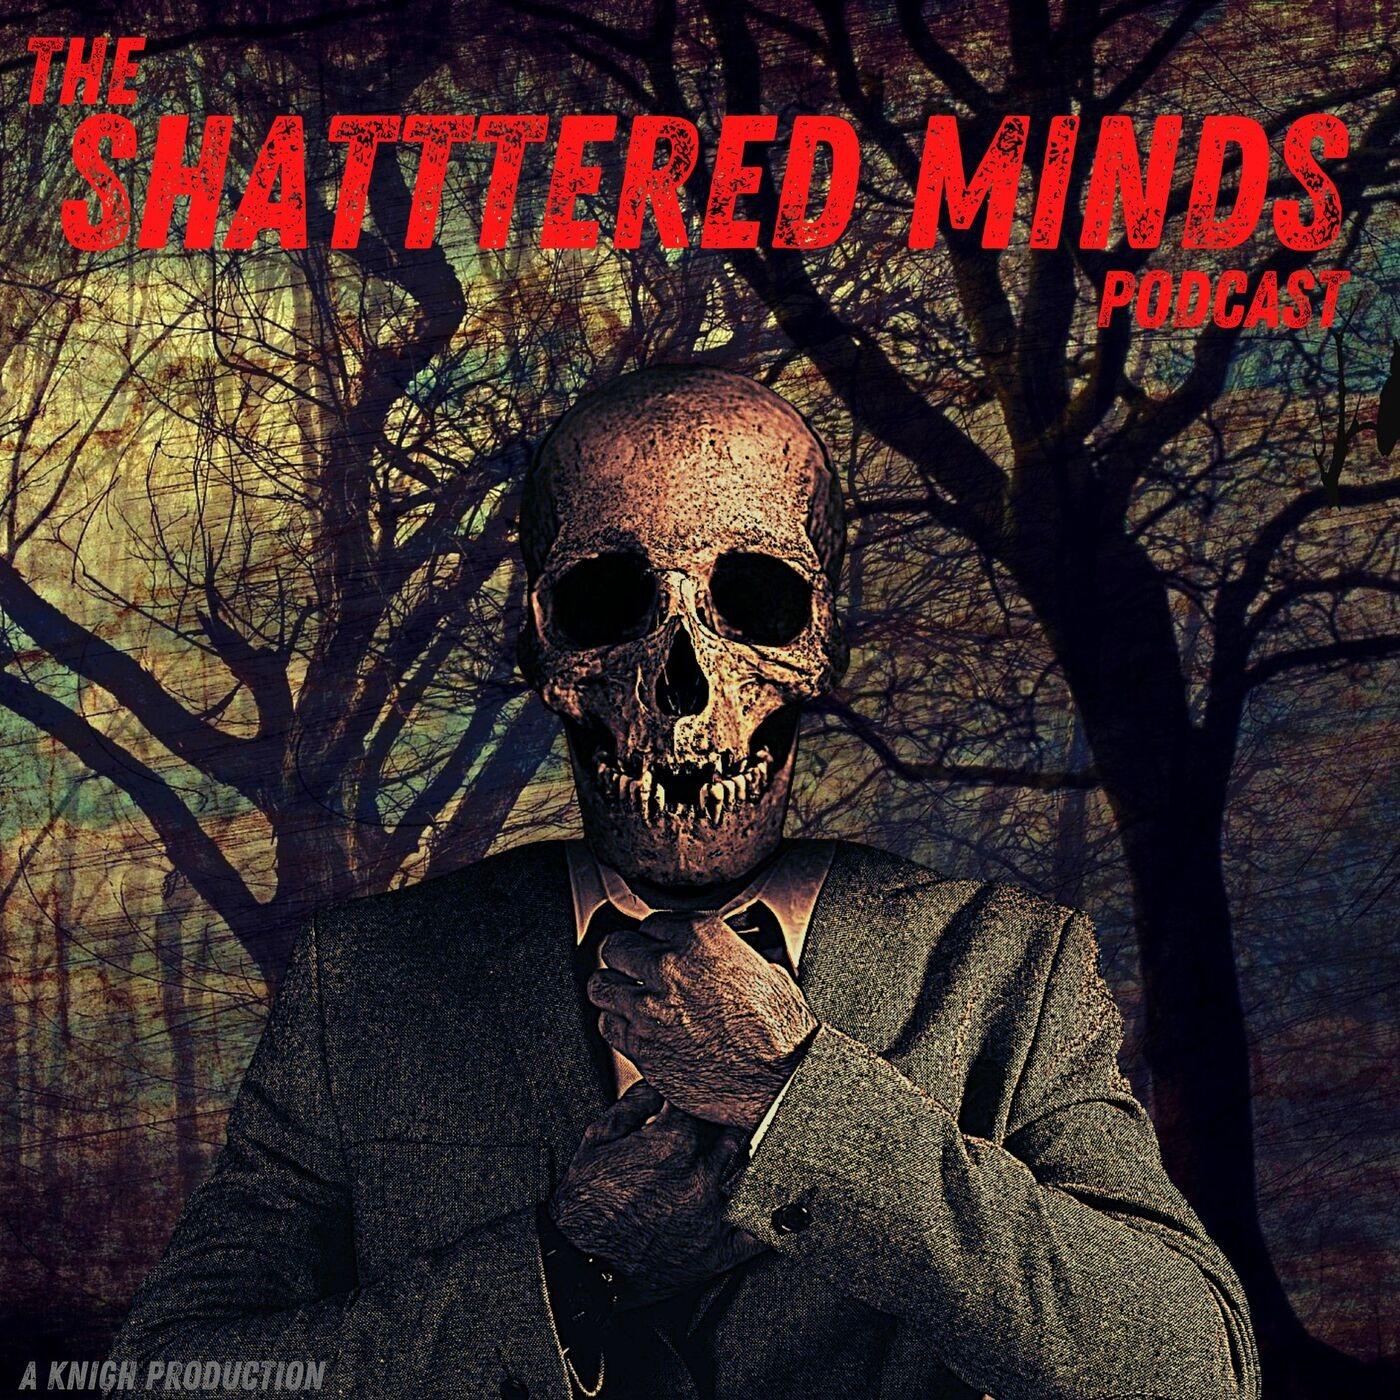 The Shattered Minds